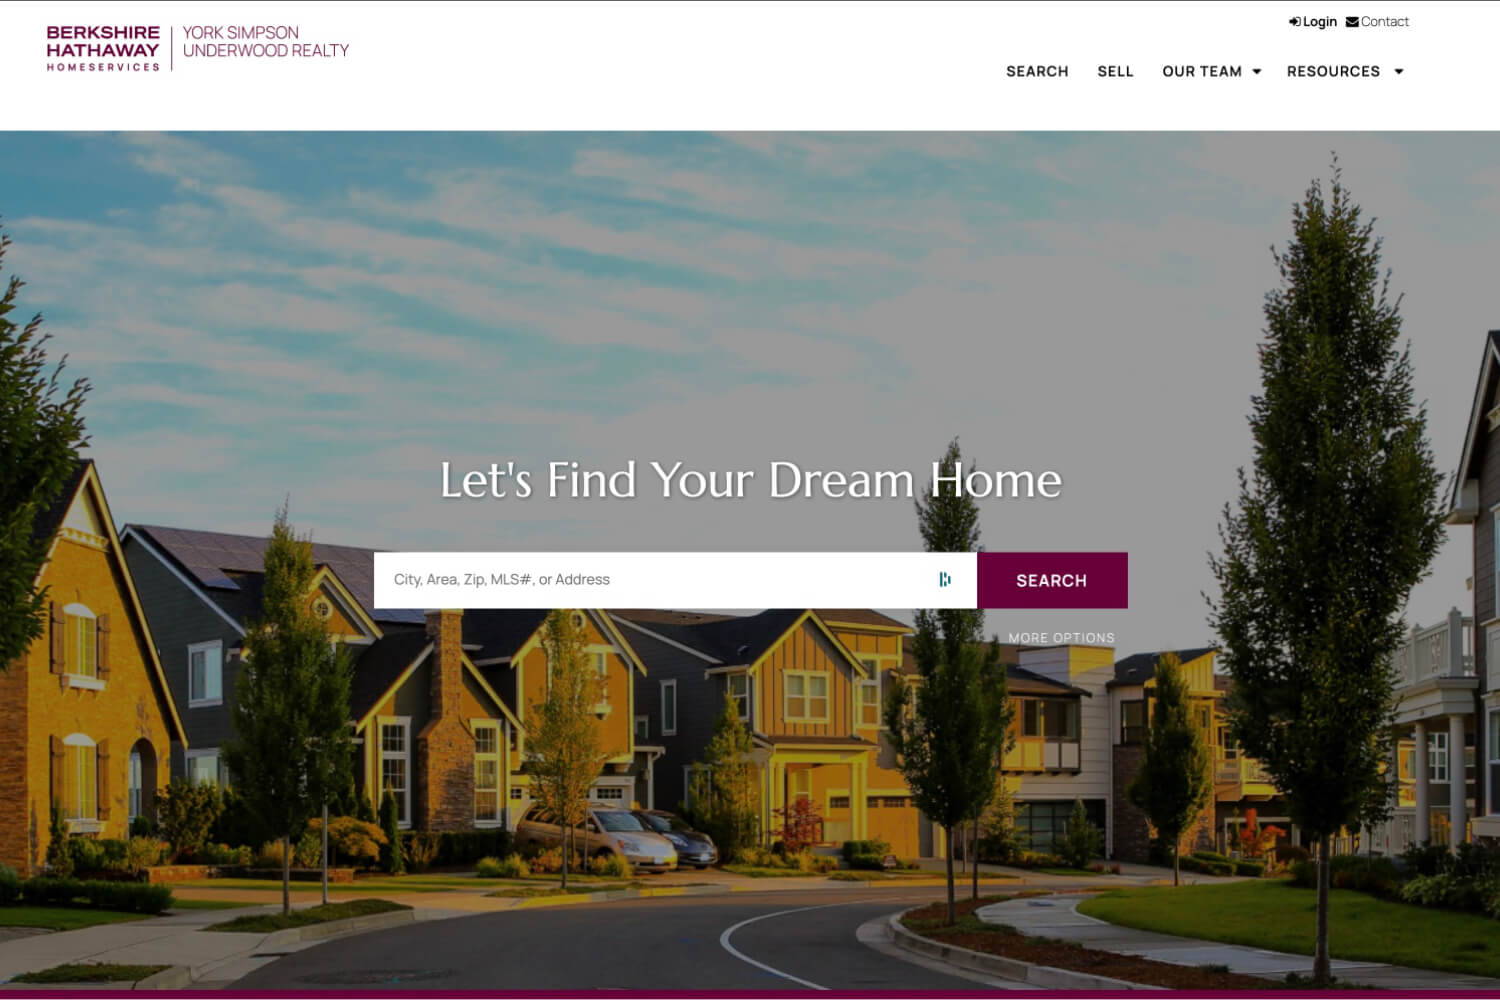 Image Of A Stunning Real Estate Website With High Quality Imagery